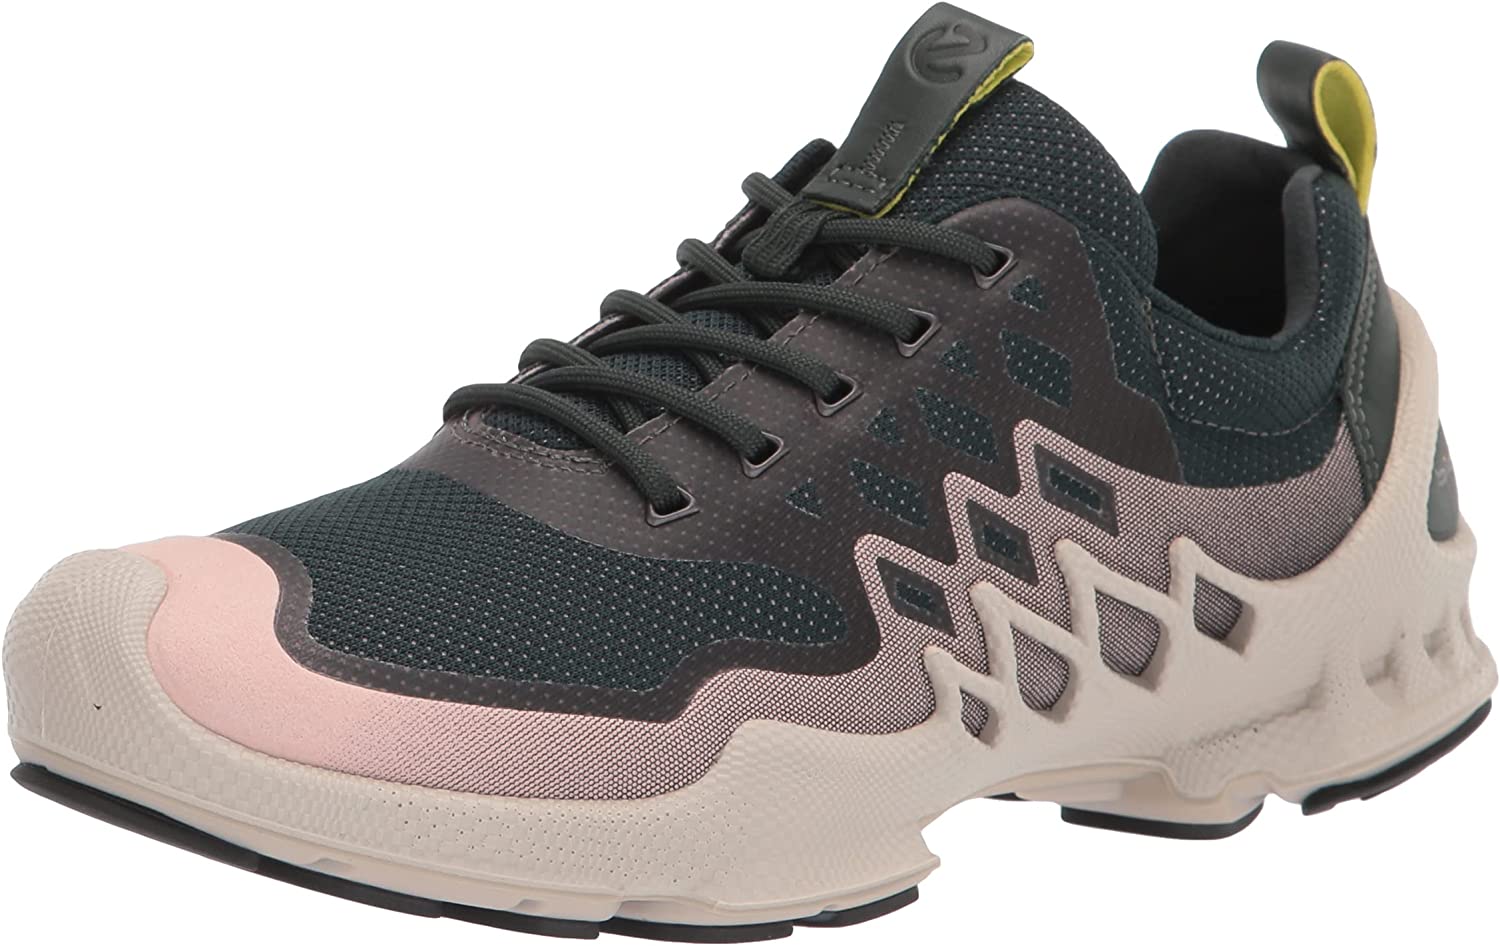 ECCO Women's Biom Aex Trainer Running Shoe from Japan - Buy authentic Plus exclusive items from Japan | ZenPlus